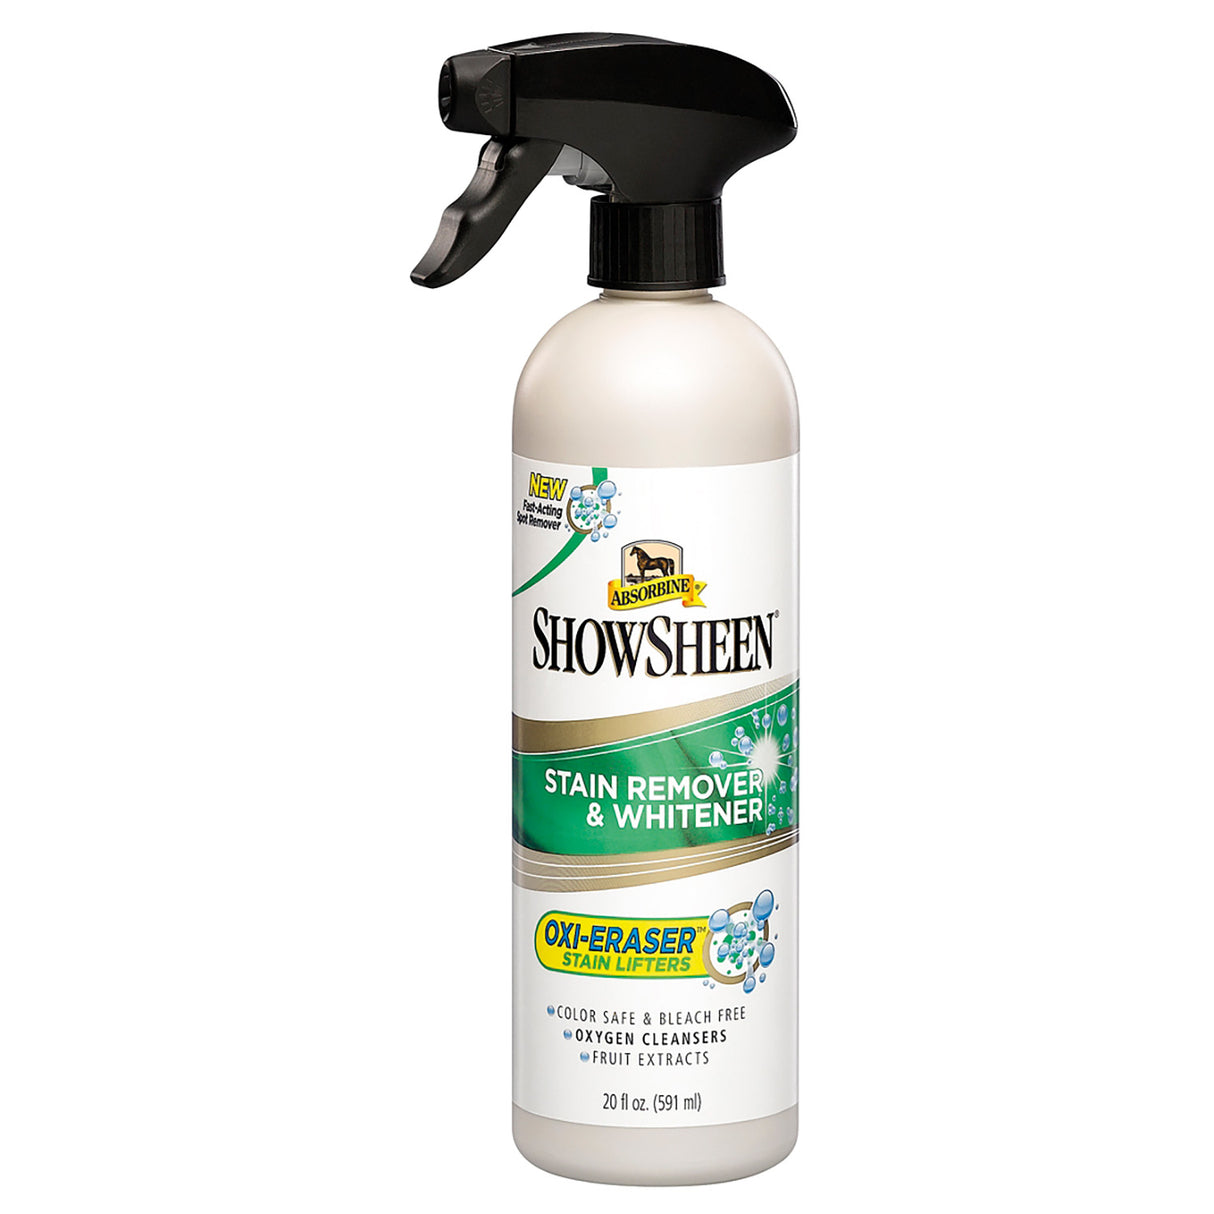 Absorbine Showsheen Stain Remover & Whitener Spray #size_591ml